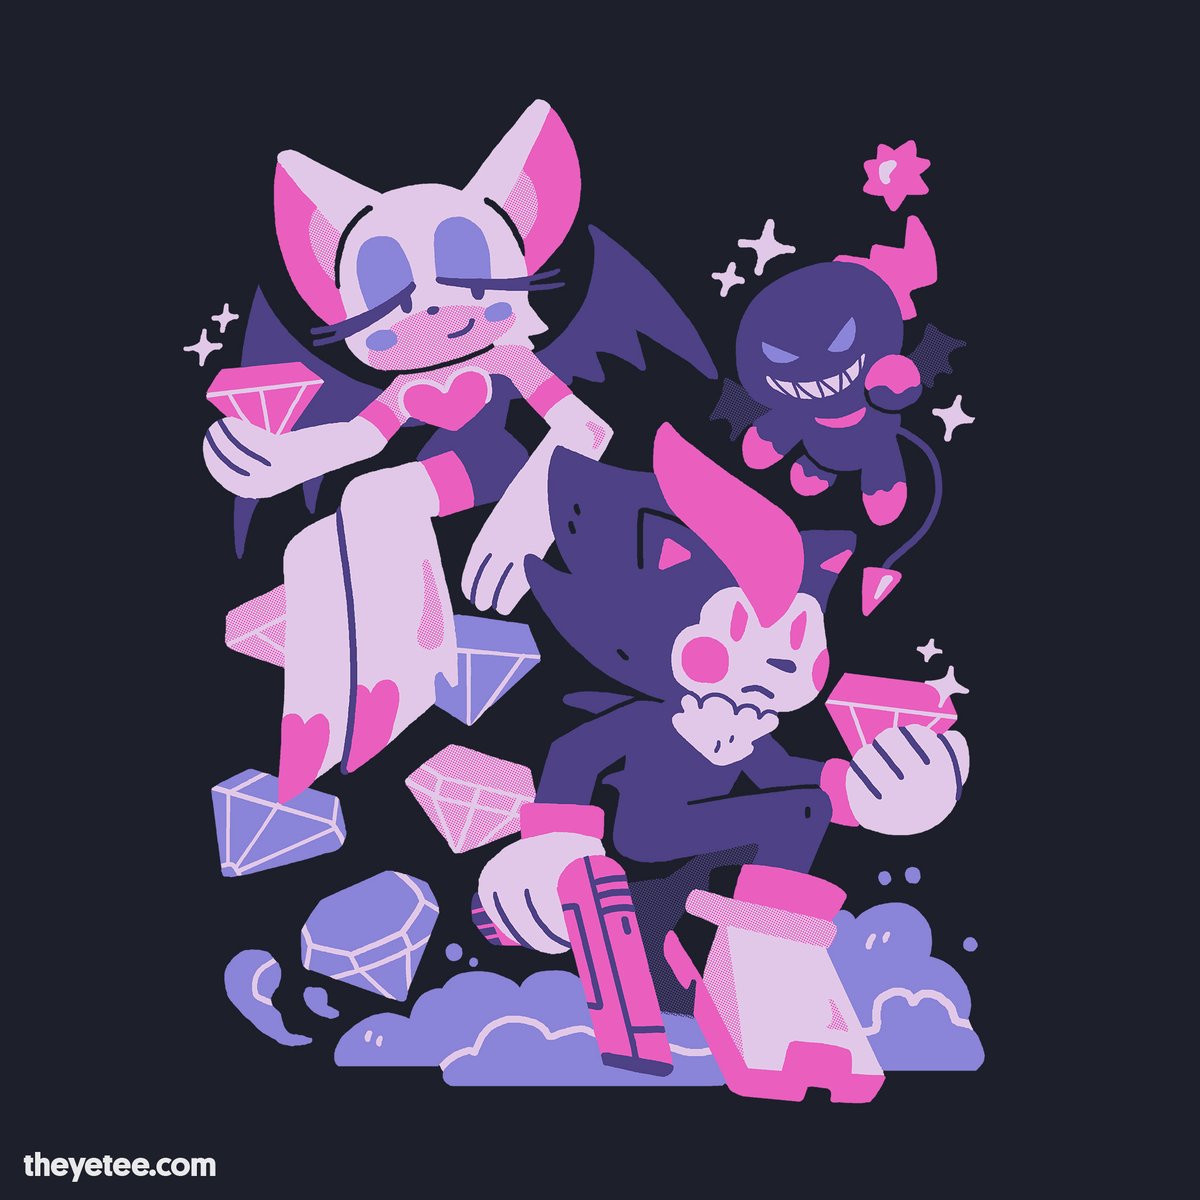 「Going rogue, beyond a shadow of a doubt!」|The Yetee 🌈のイラスト